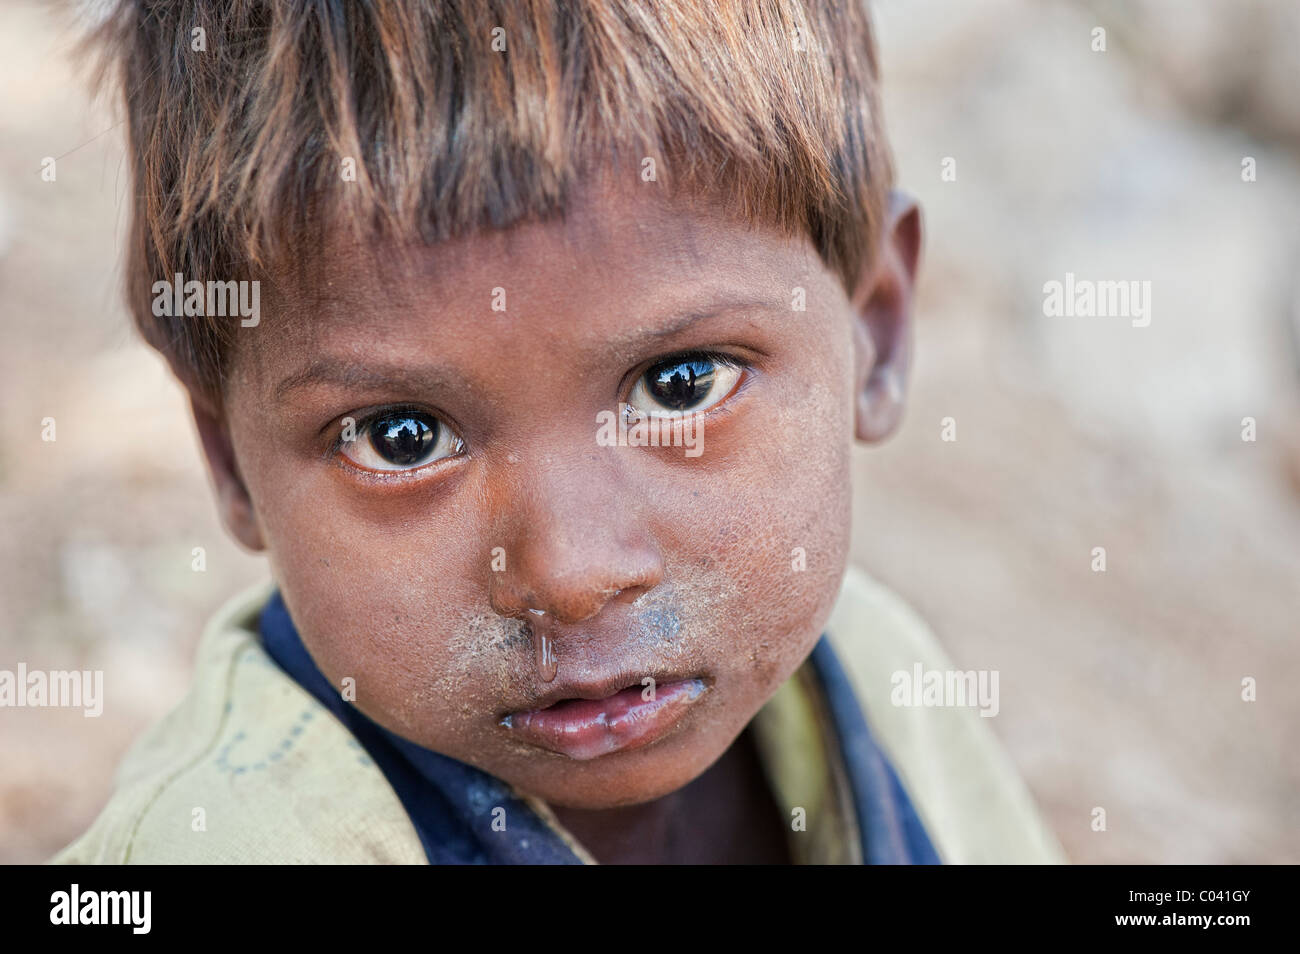 Young poor lower caste Indian street infant boy staring Stock Photo